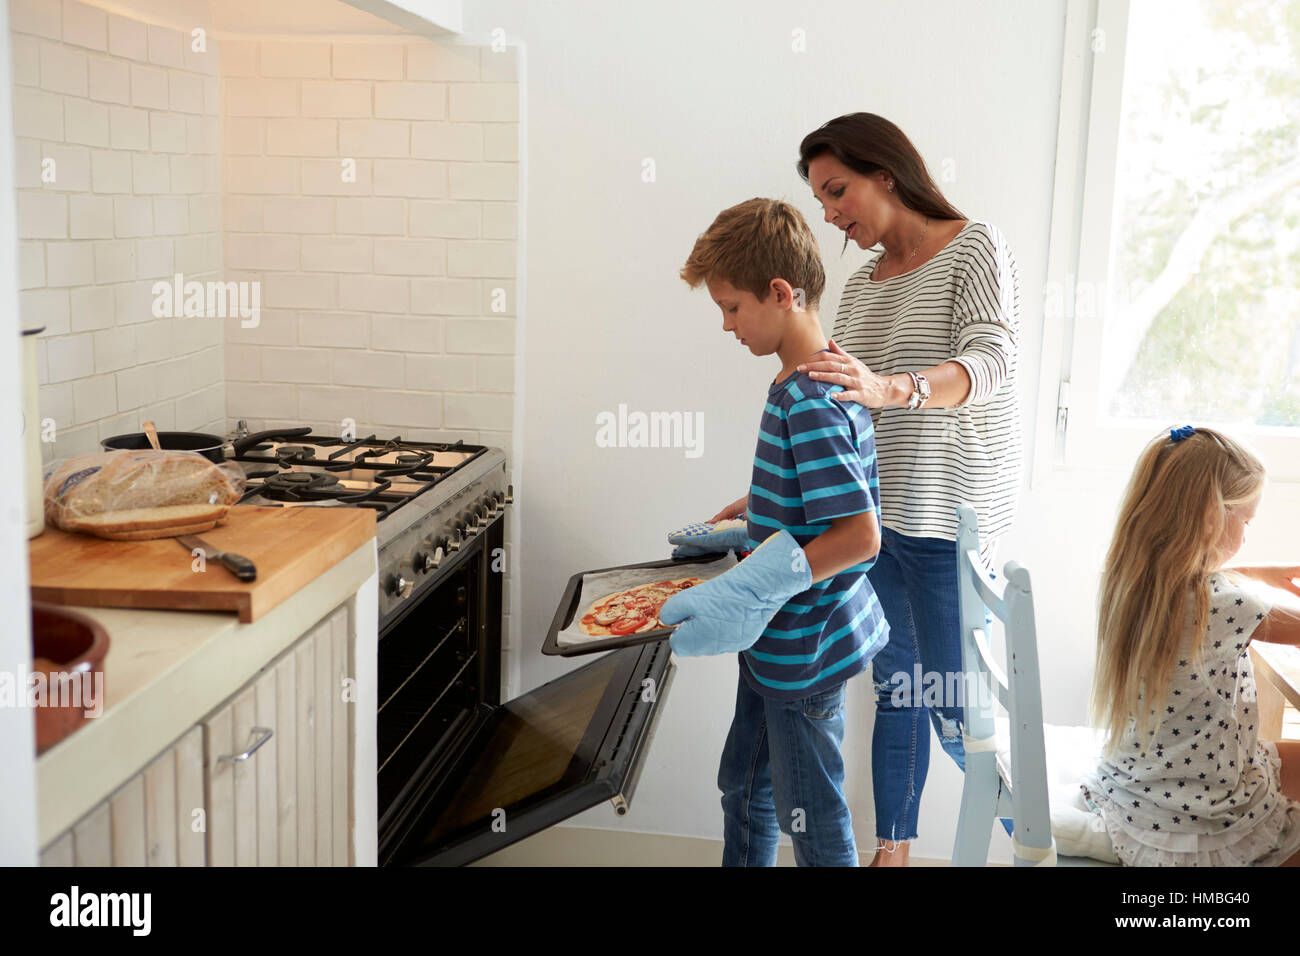 Mother And Children Baking Homemade Pizza In Oven Stock Photo